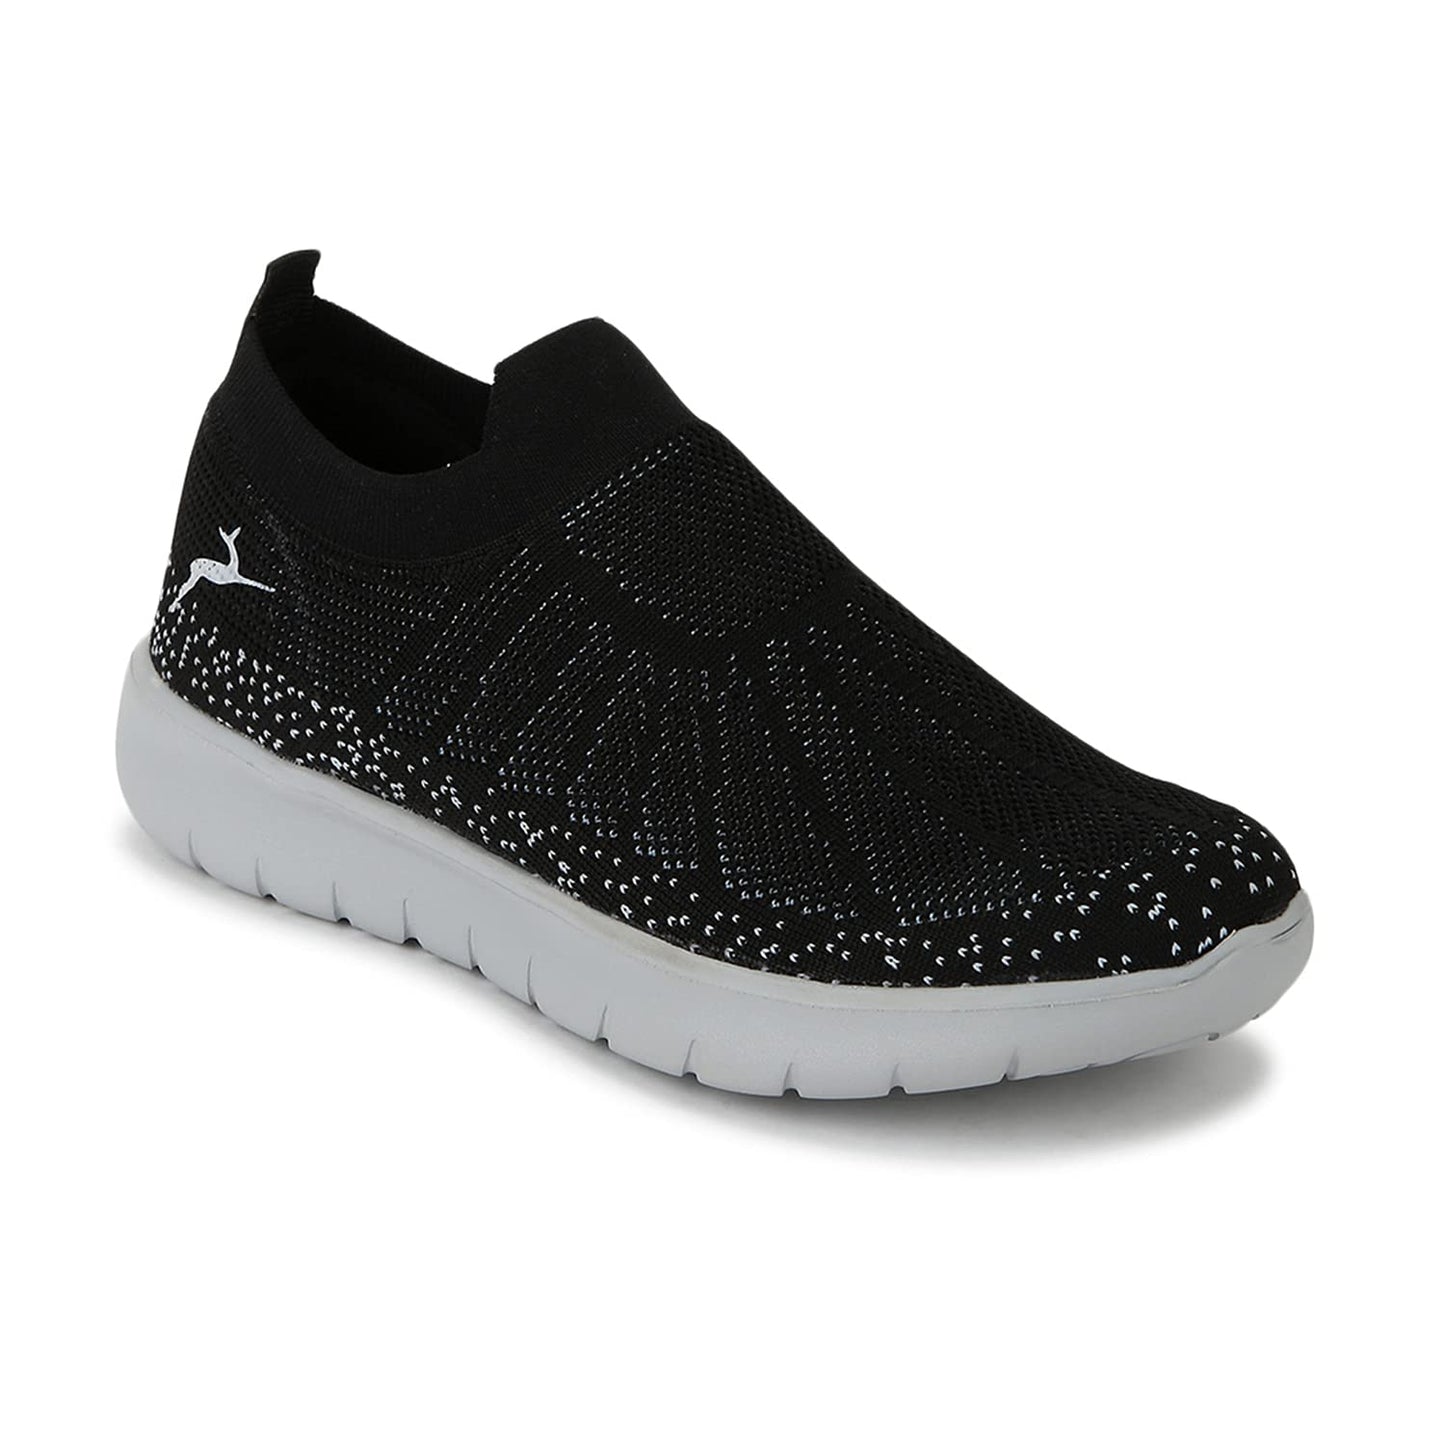 Marc Loire Women's Lightweight Athleisure Knitted Active Wear Slip-On Sneaker Shoes for Sports, Athletics, and Walking (Black, Numeric_3)